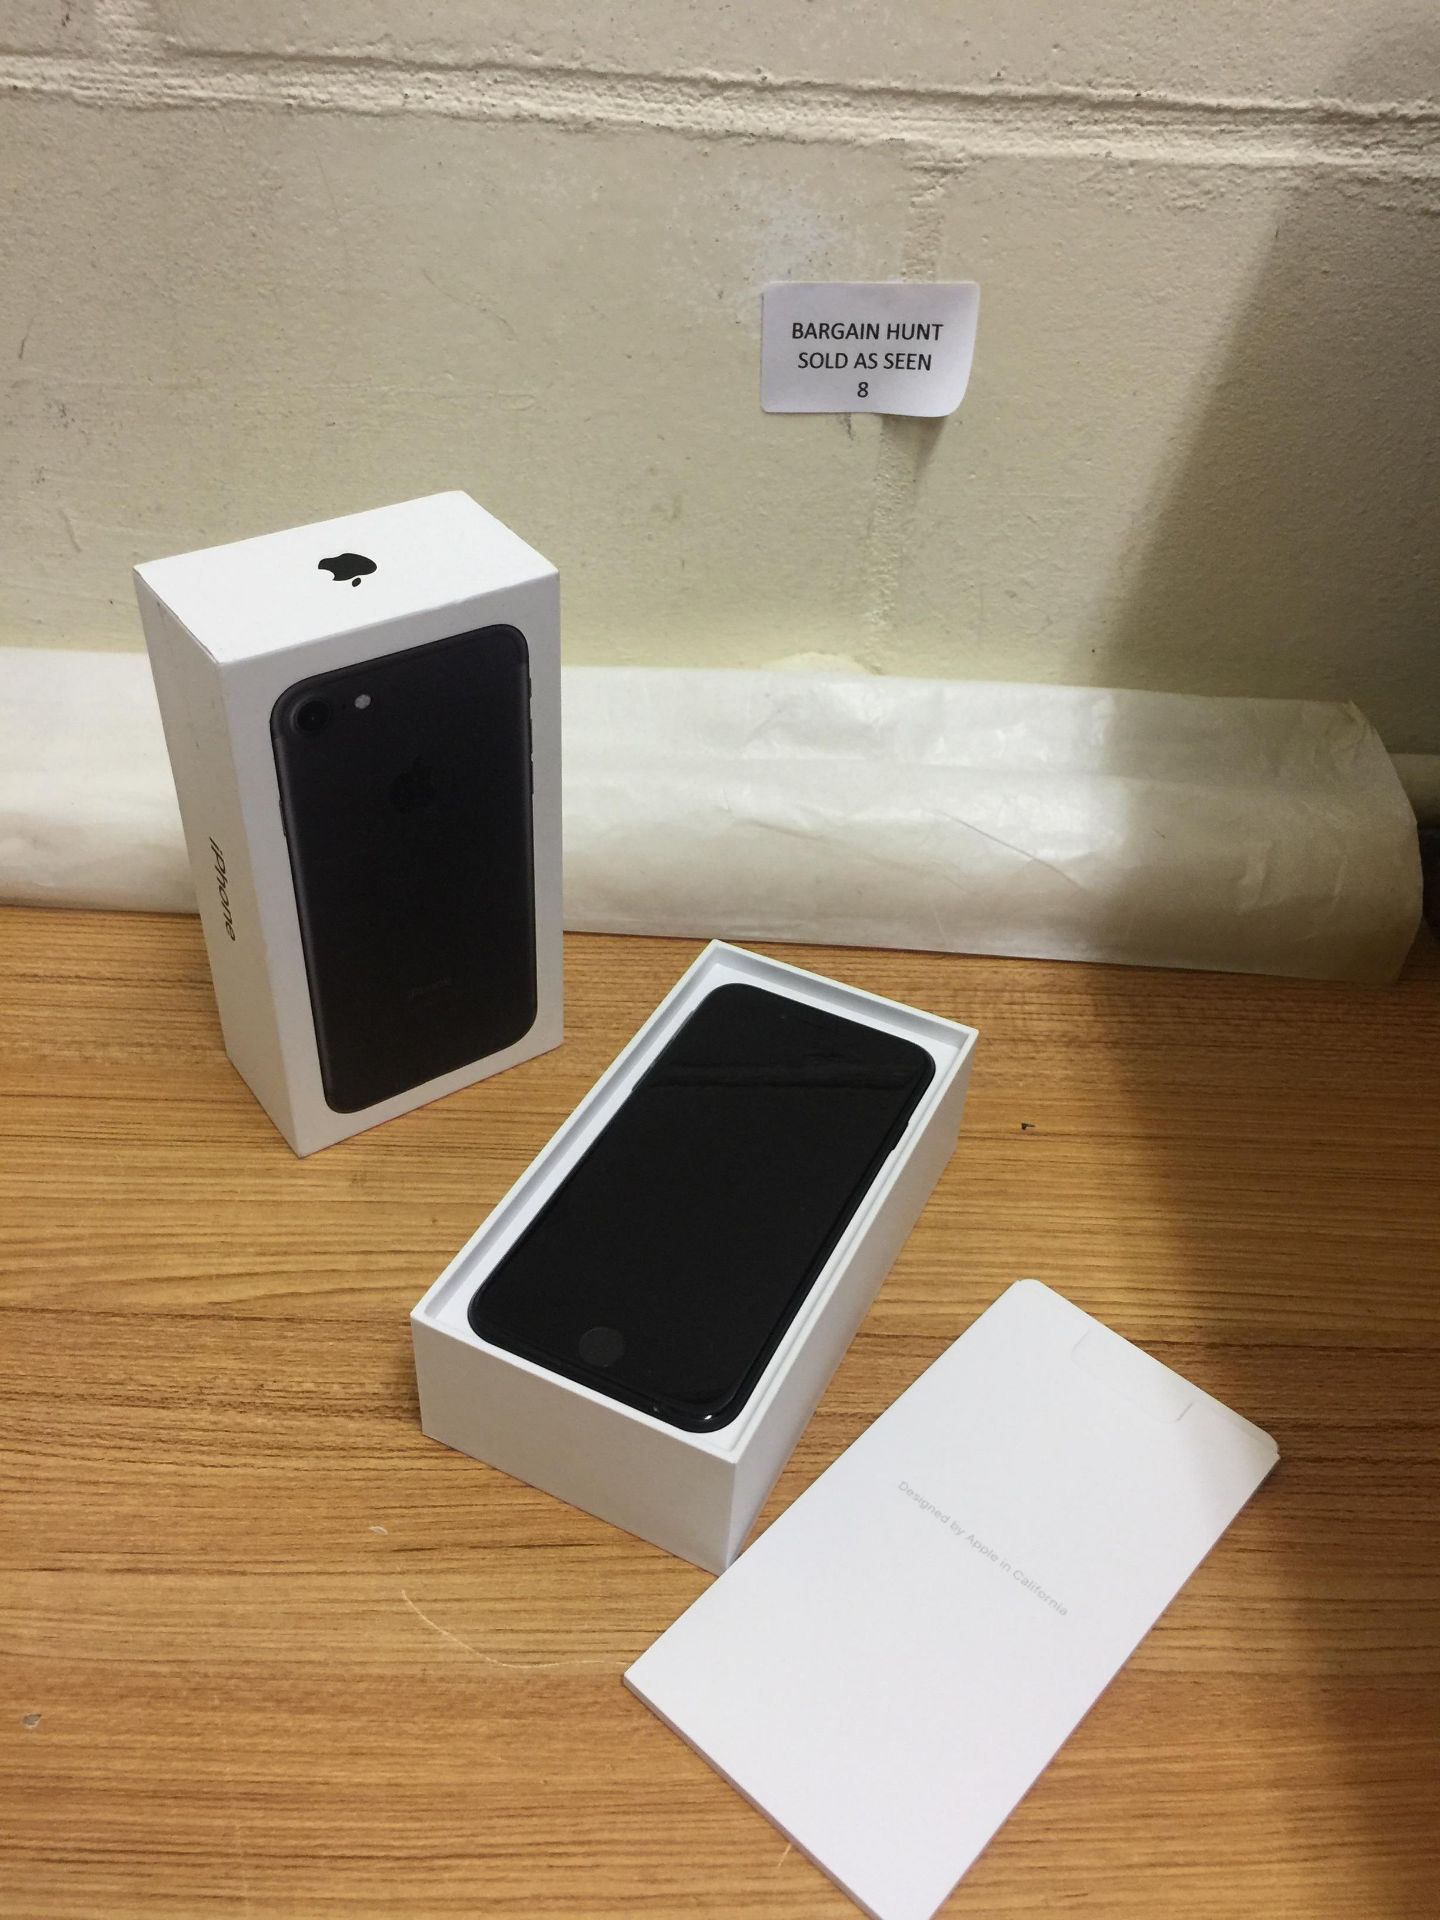 Apple Iphone 7 128GB Black (Does not power up) RRP £610